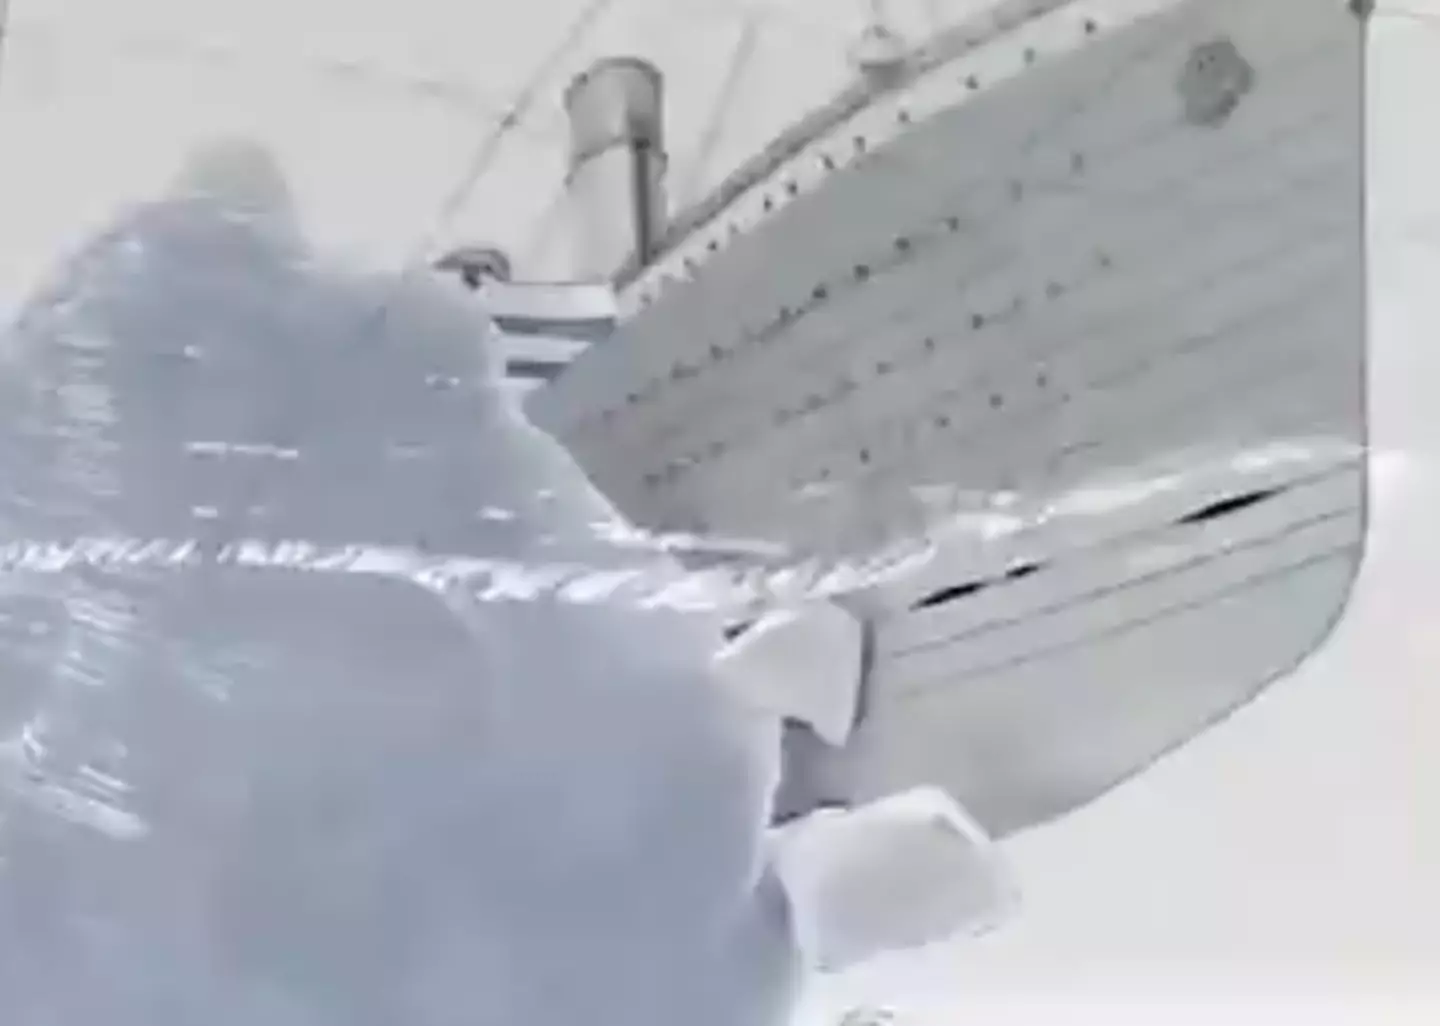 The animation shows how the Titanic started to take on water.